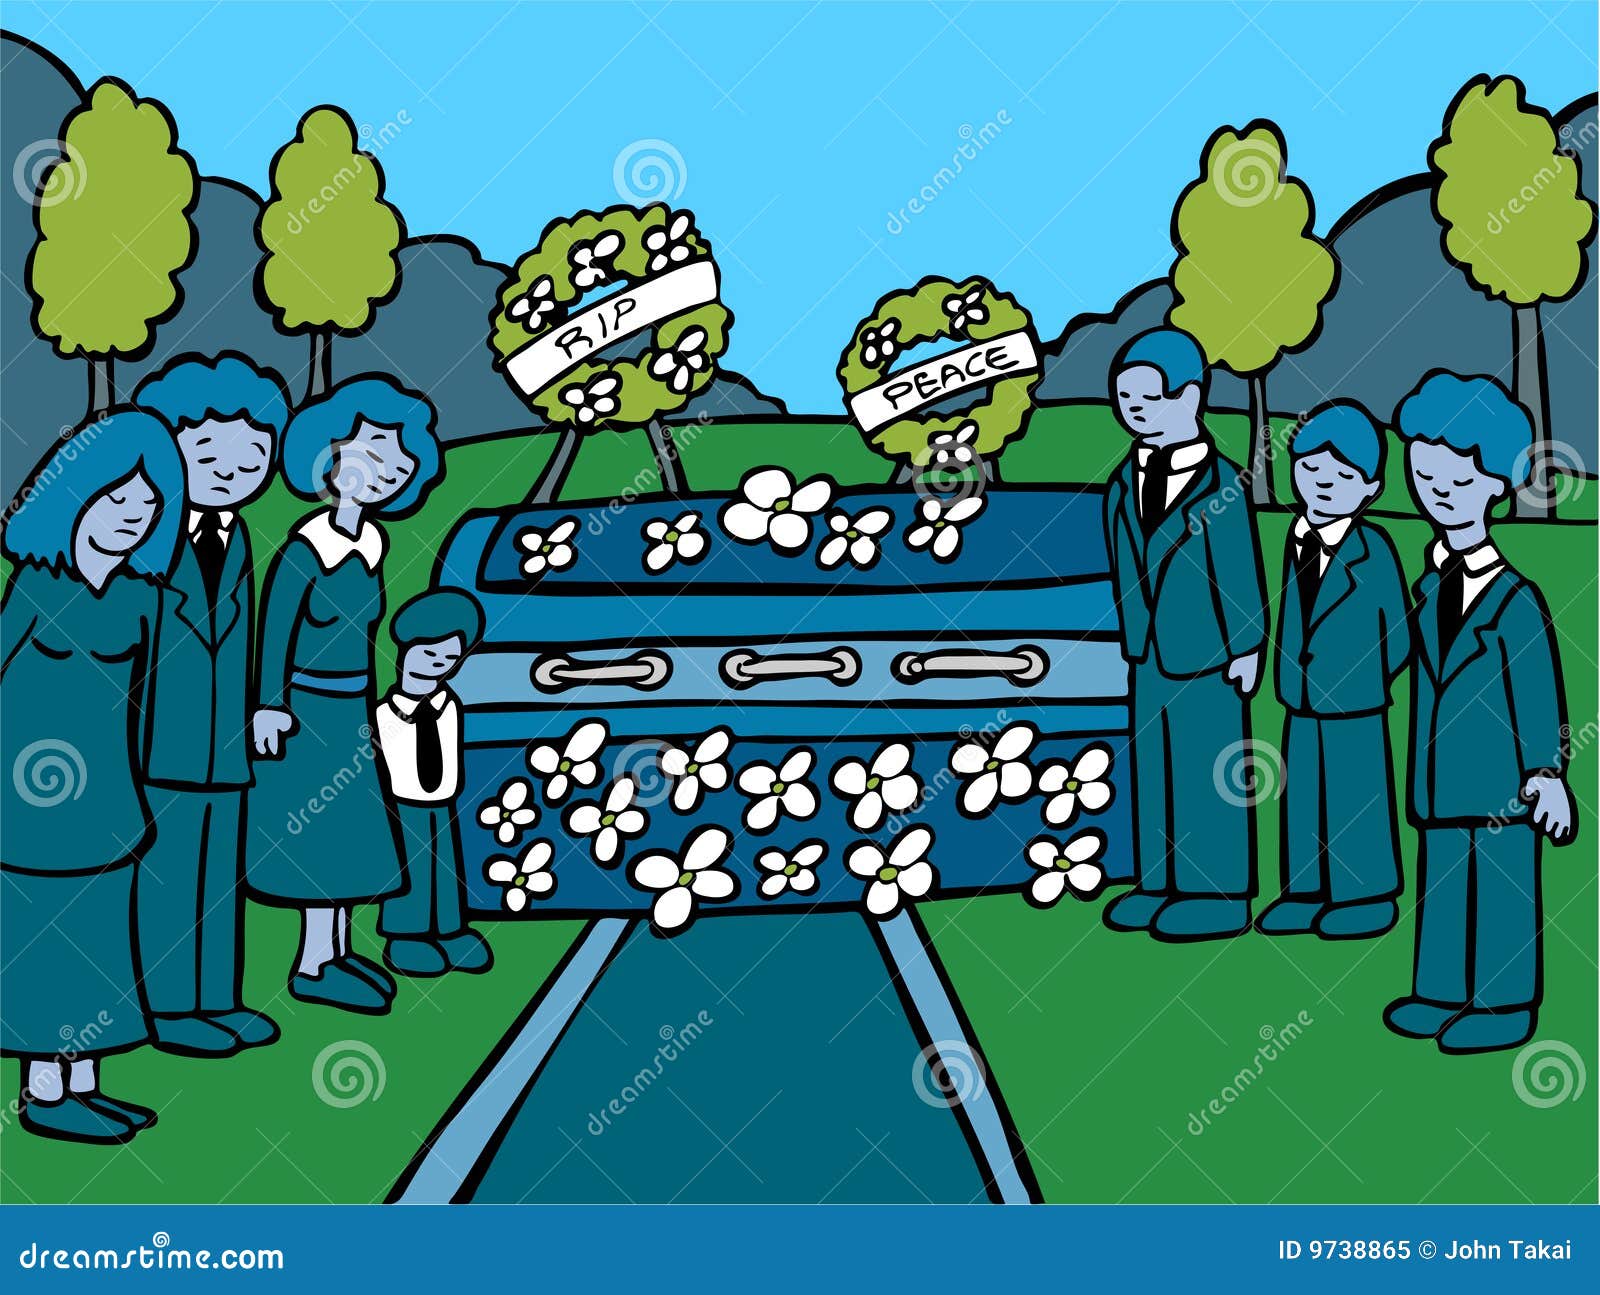 free christian funeral clipart - photo #41